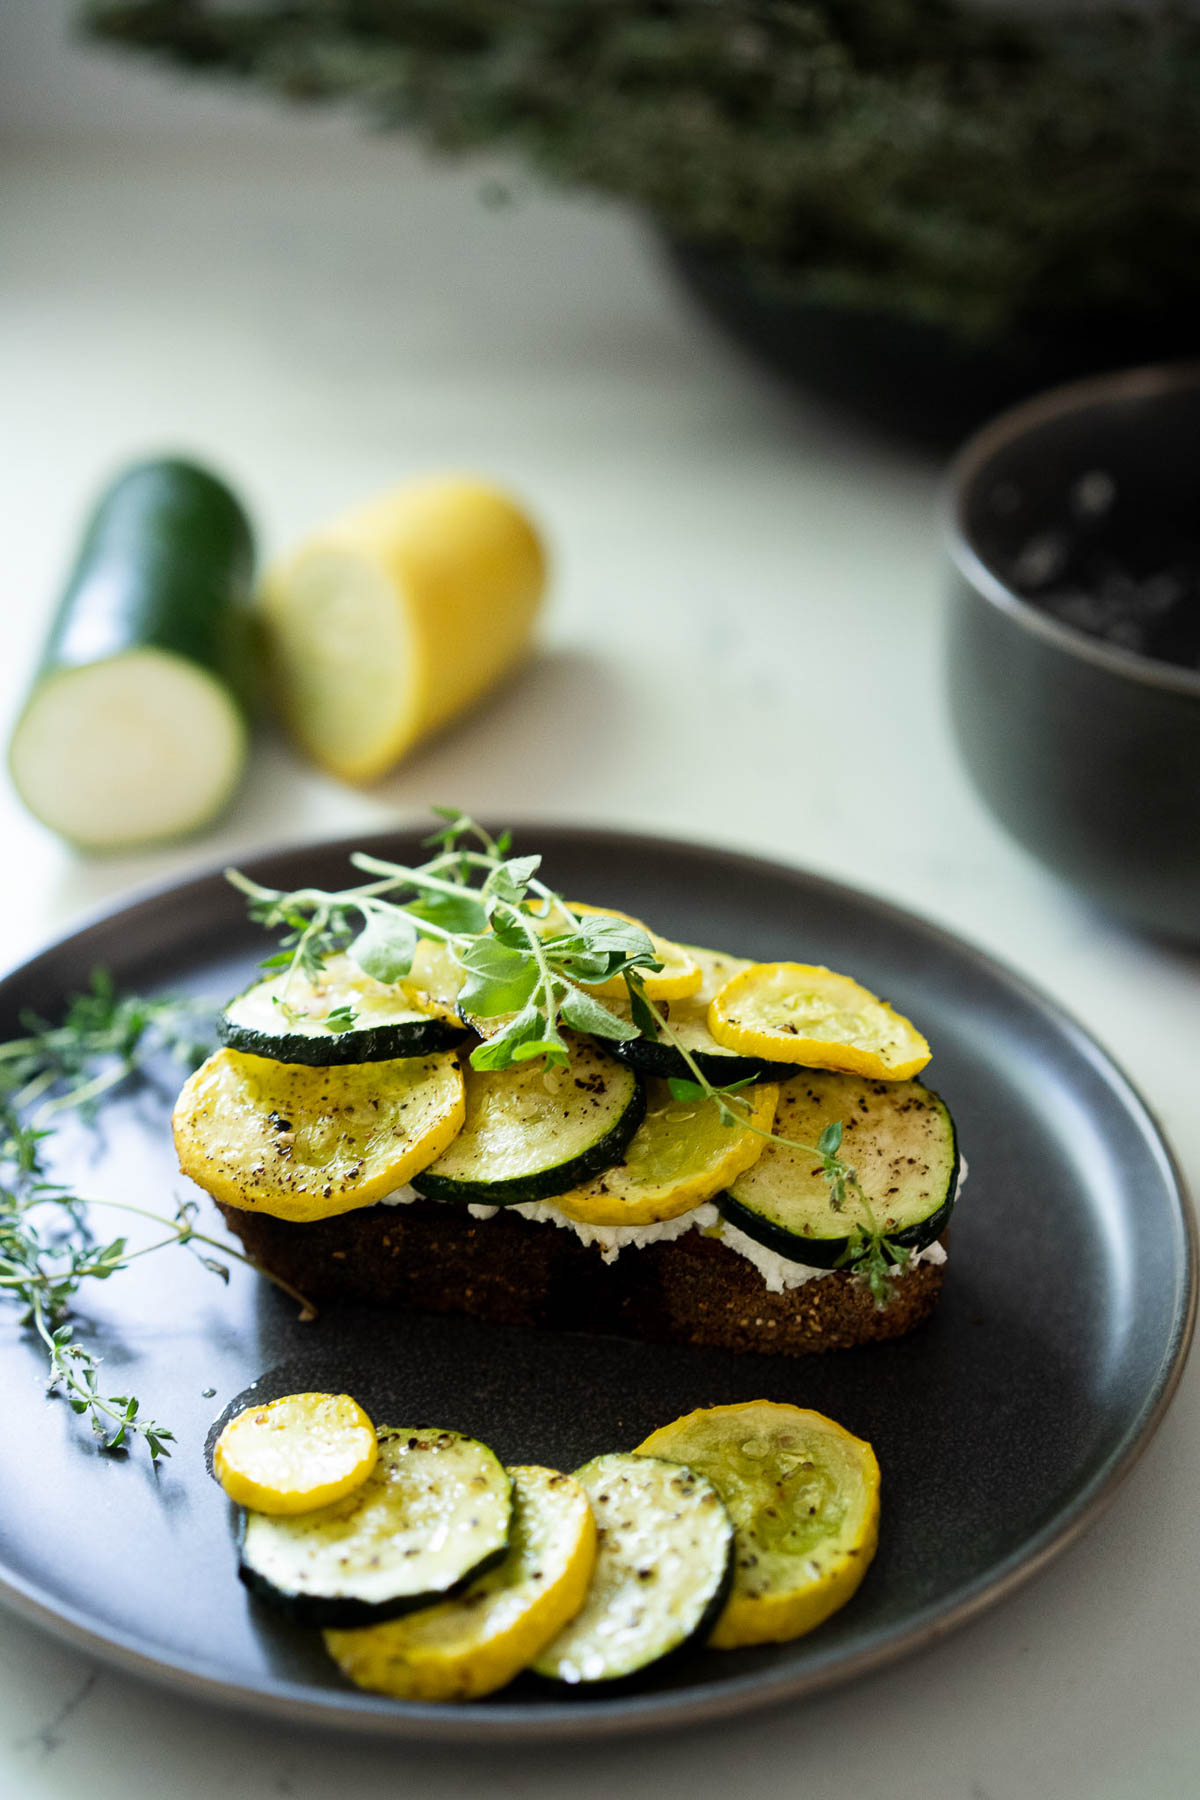 Hot Weather Dinner Ideas - Ricotta Toast with Zucchini